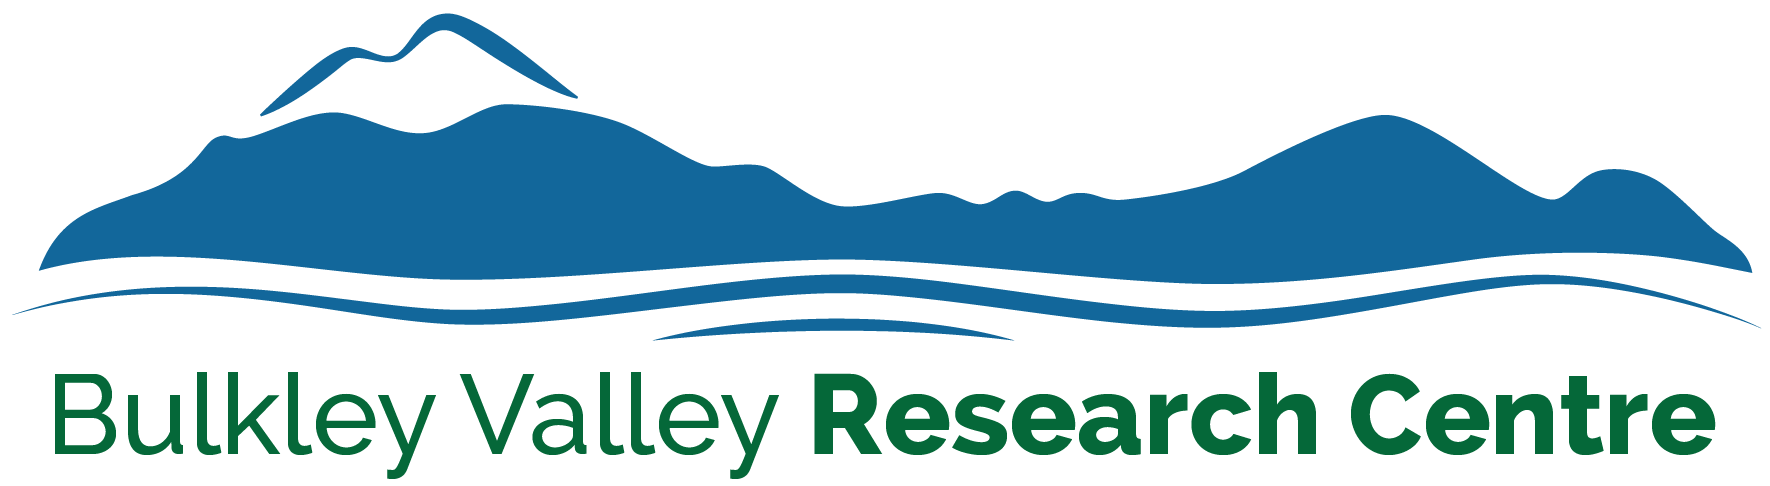 Bulkley Valley Research Centre